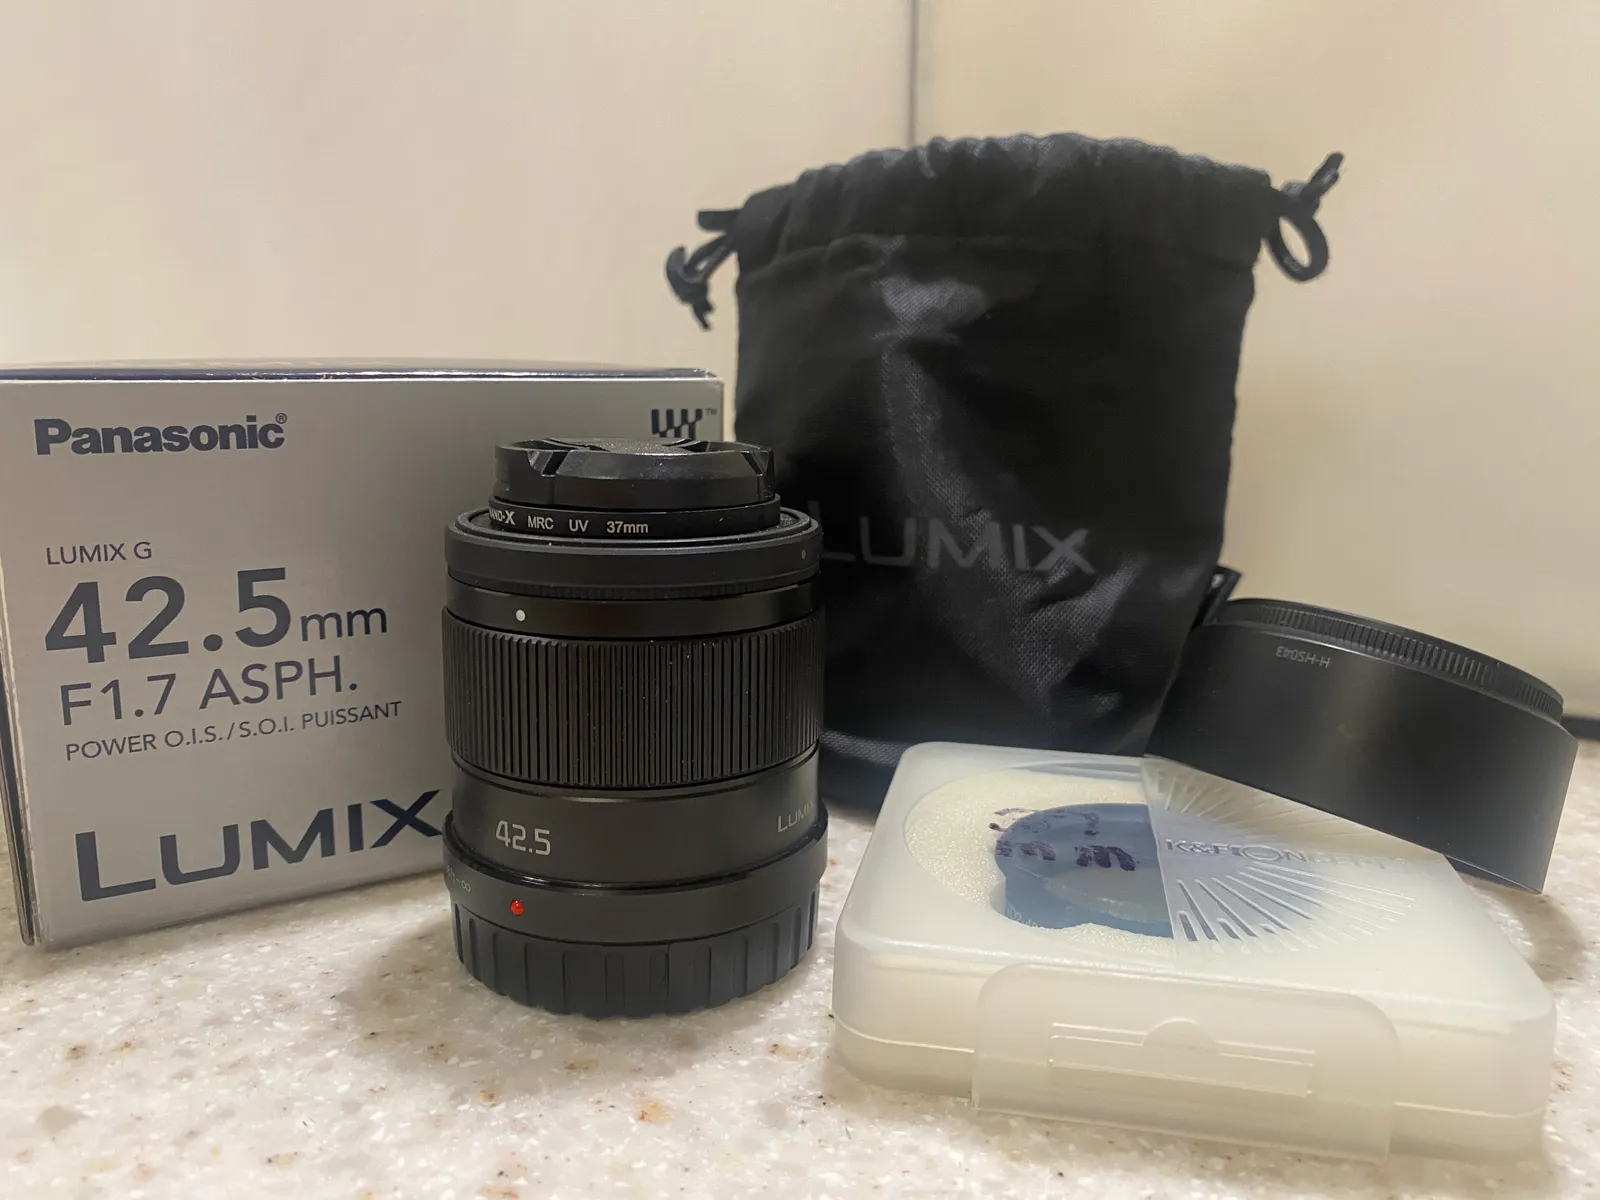 Lumix G 42.5mm f/1.7 ASPH. POWER O.I.S., ND filter, protector, etc